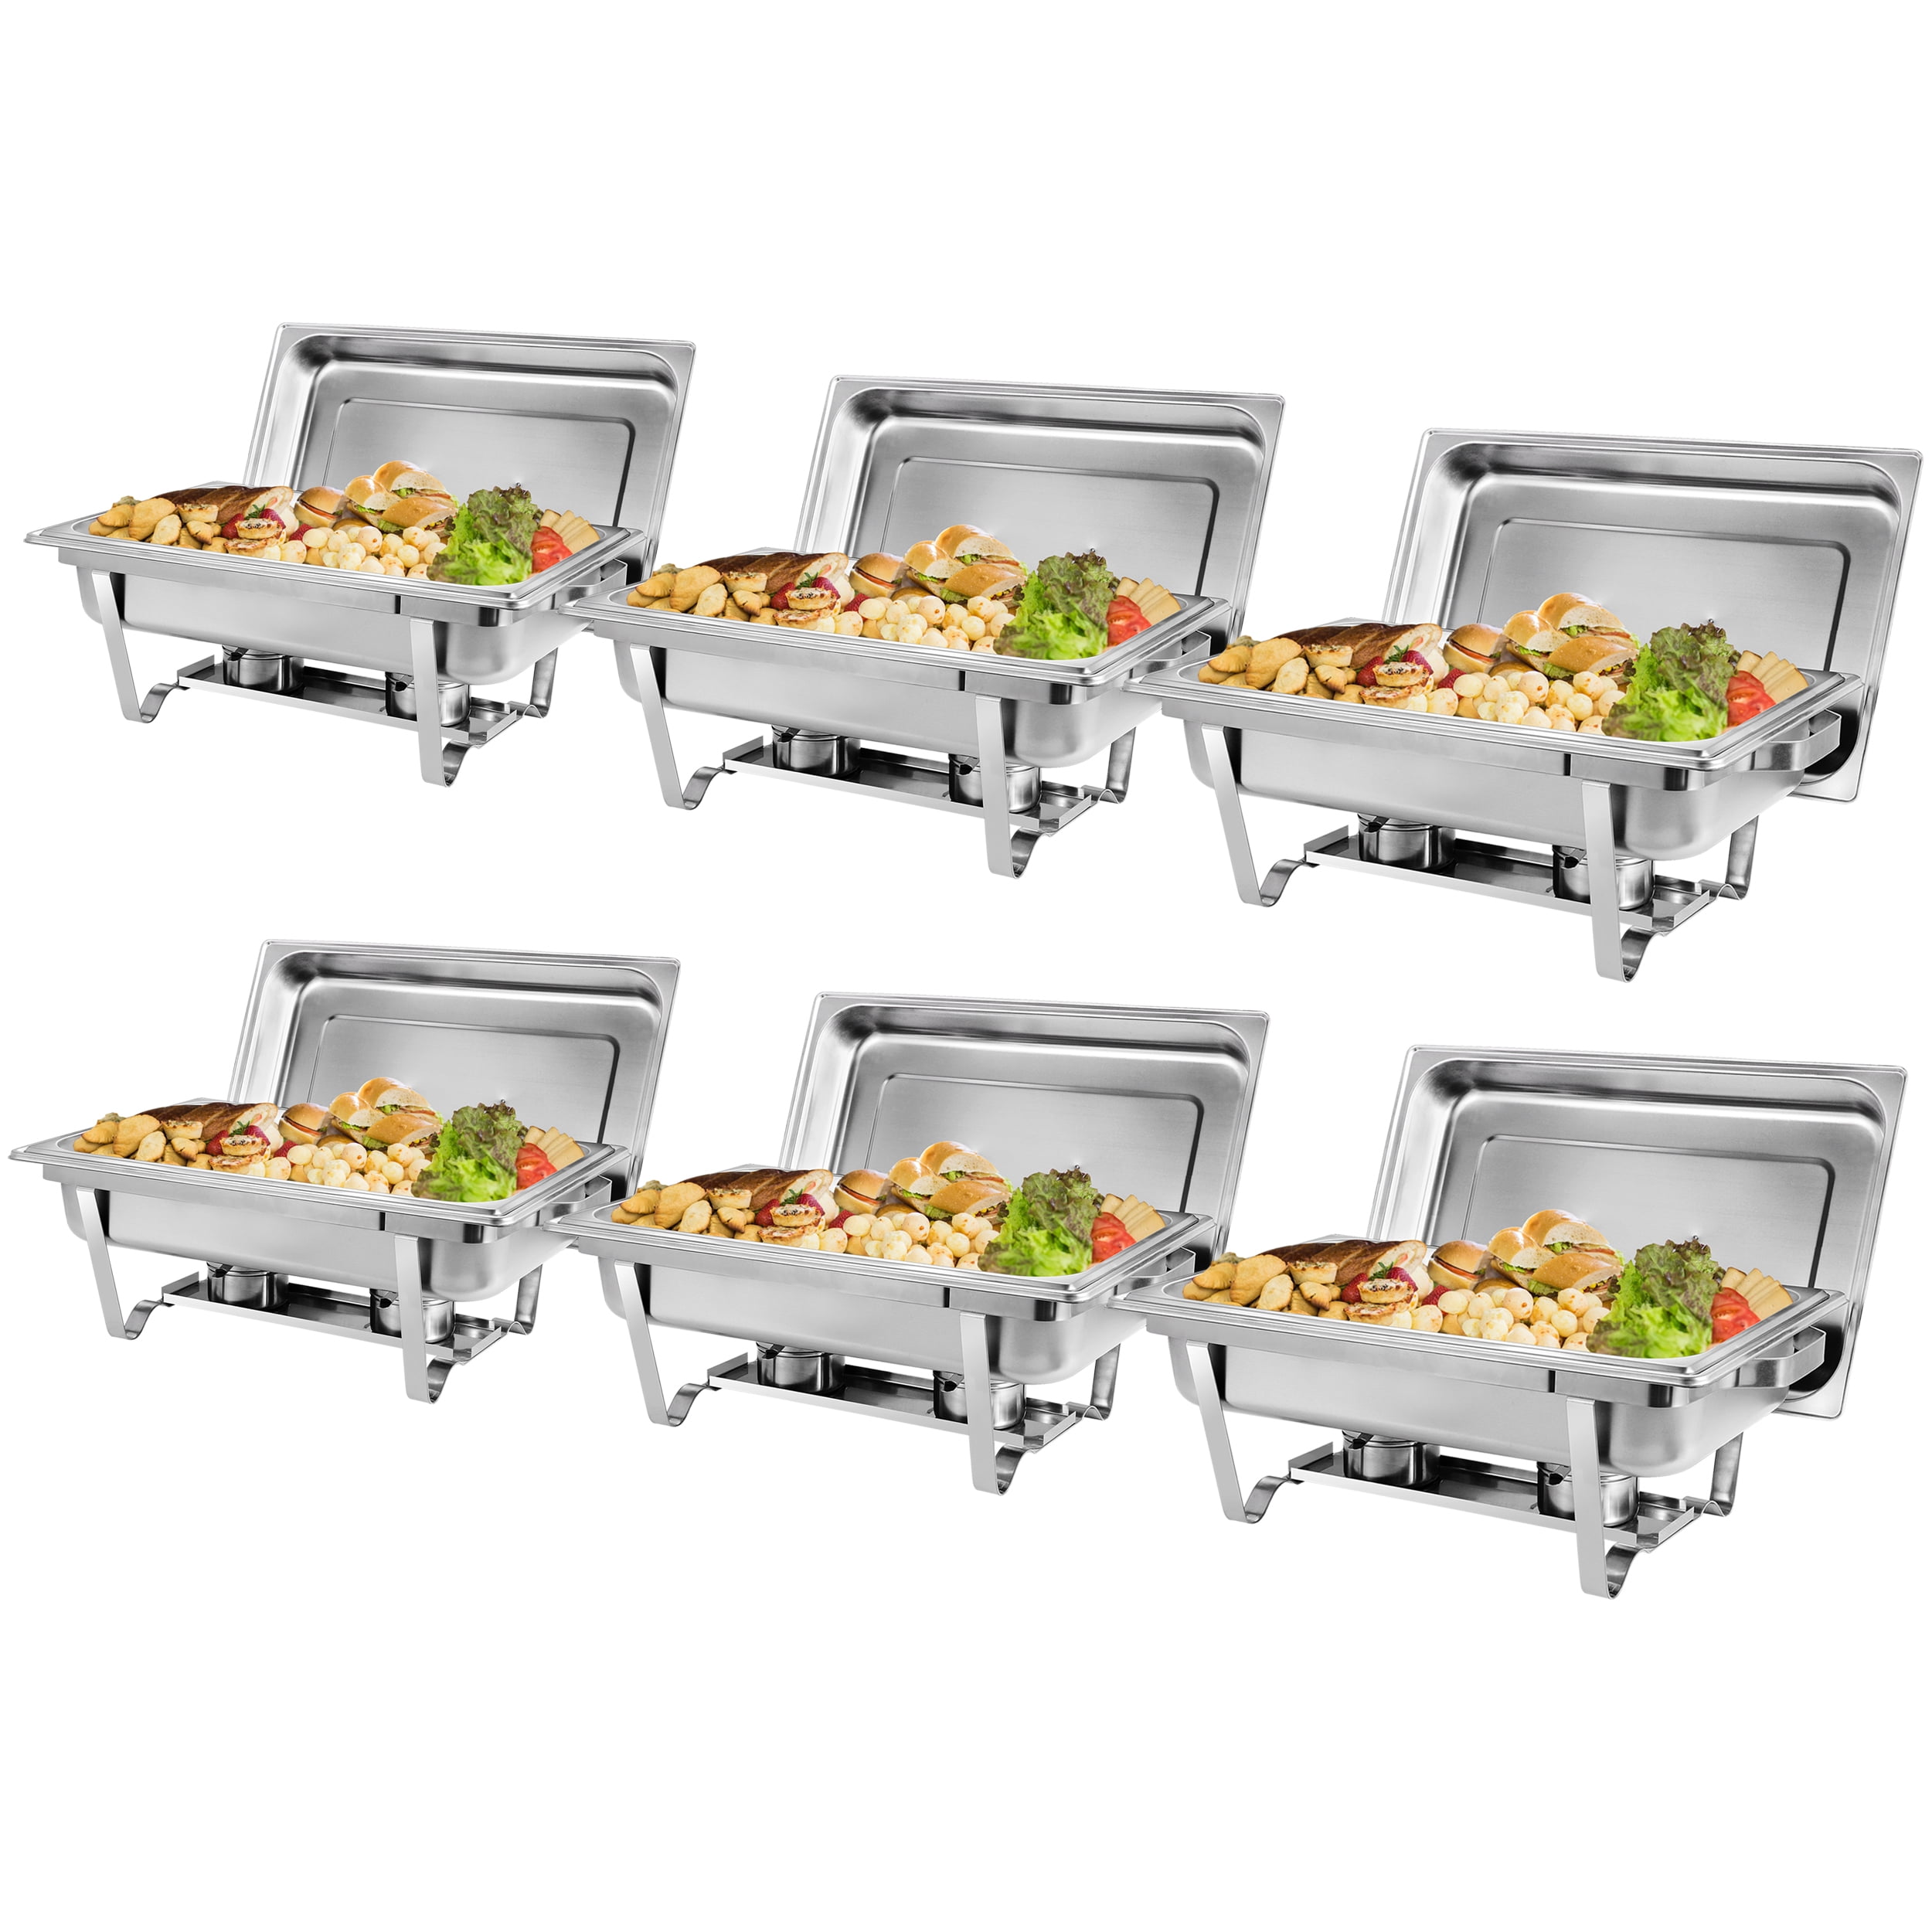 4 Pack Chafing Dish Sets Buffet Catering Stainless Steel Food Warmer 9L/8 Quart 